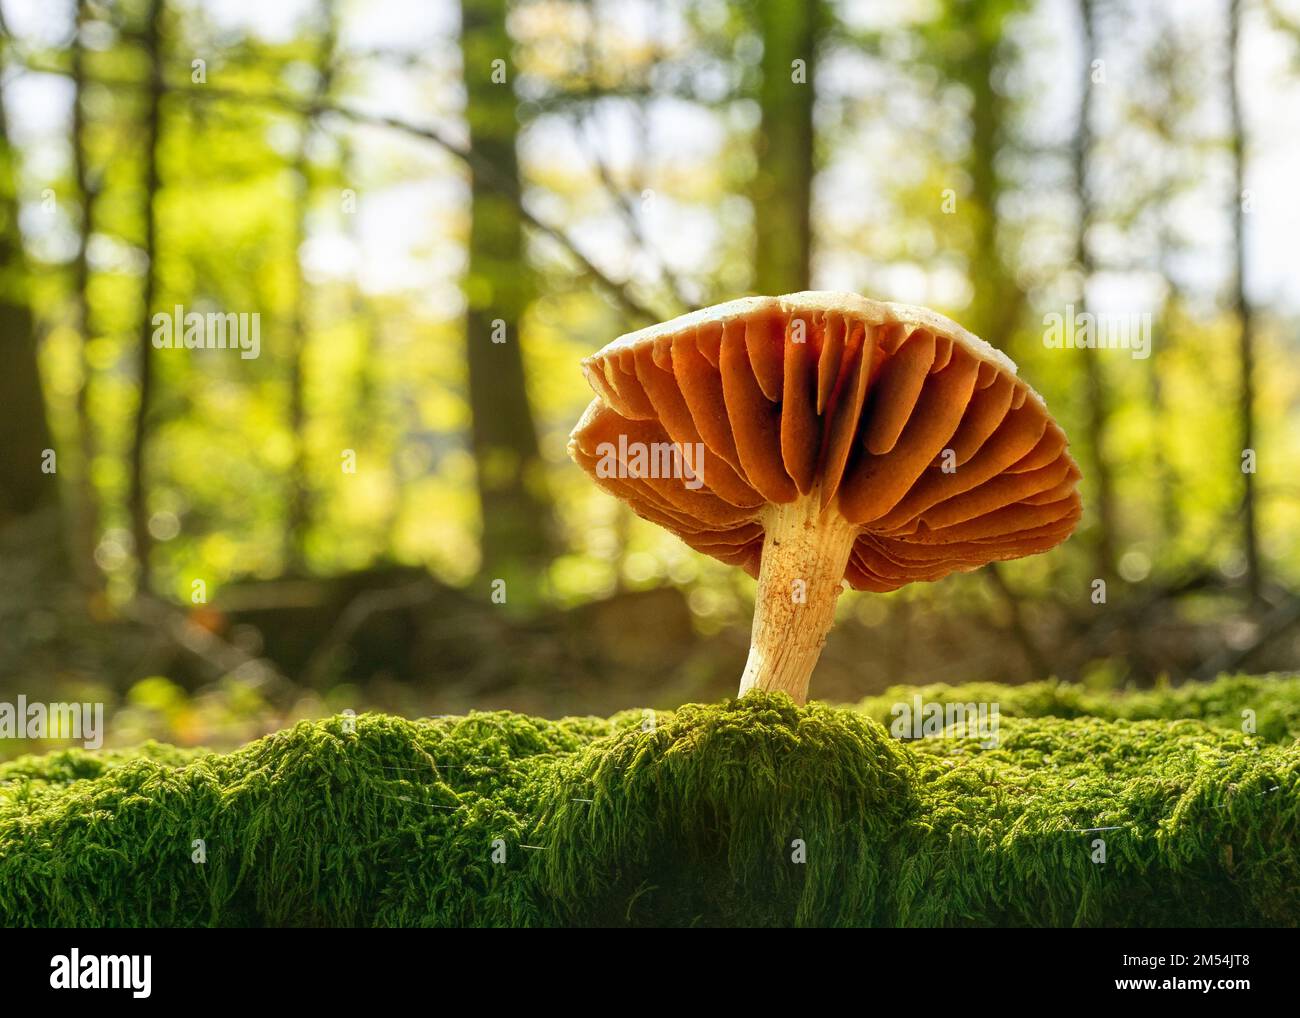 A closeup of a Deadly webcap fungus growing on a mossy surface in an evergreen forest Stock Photo